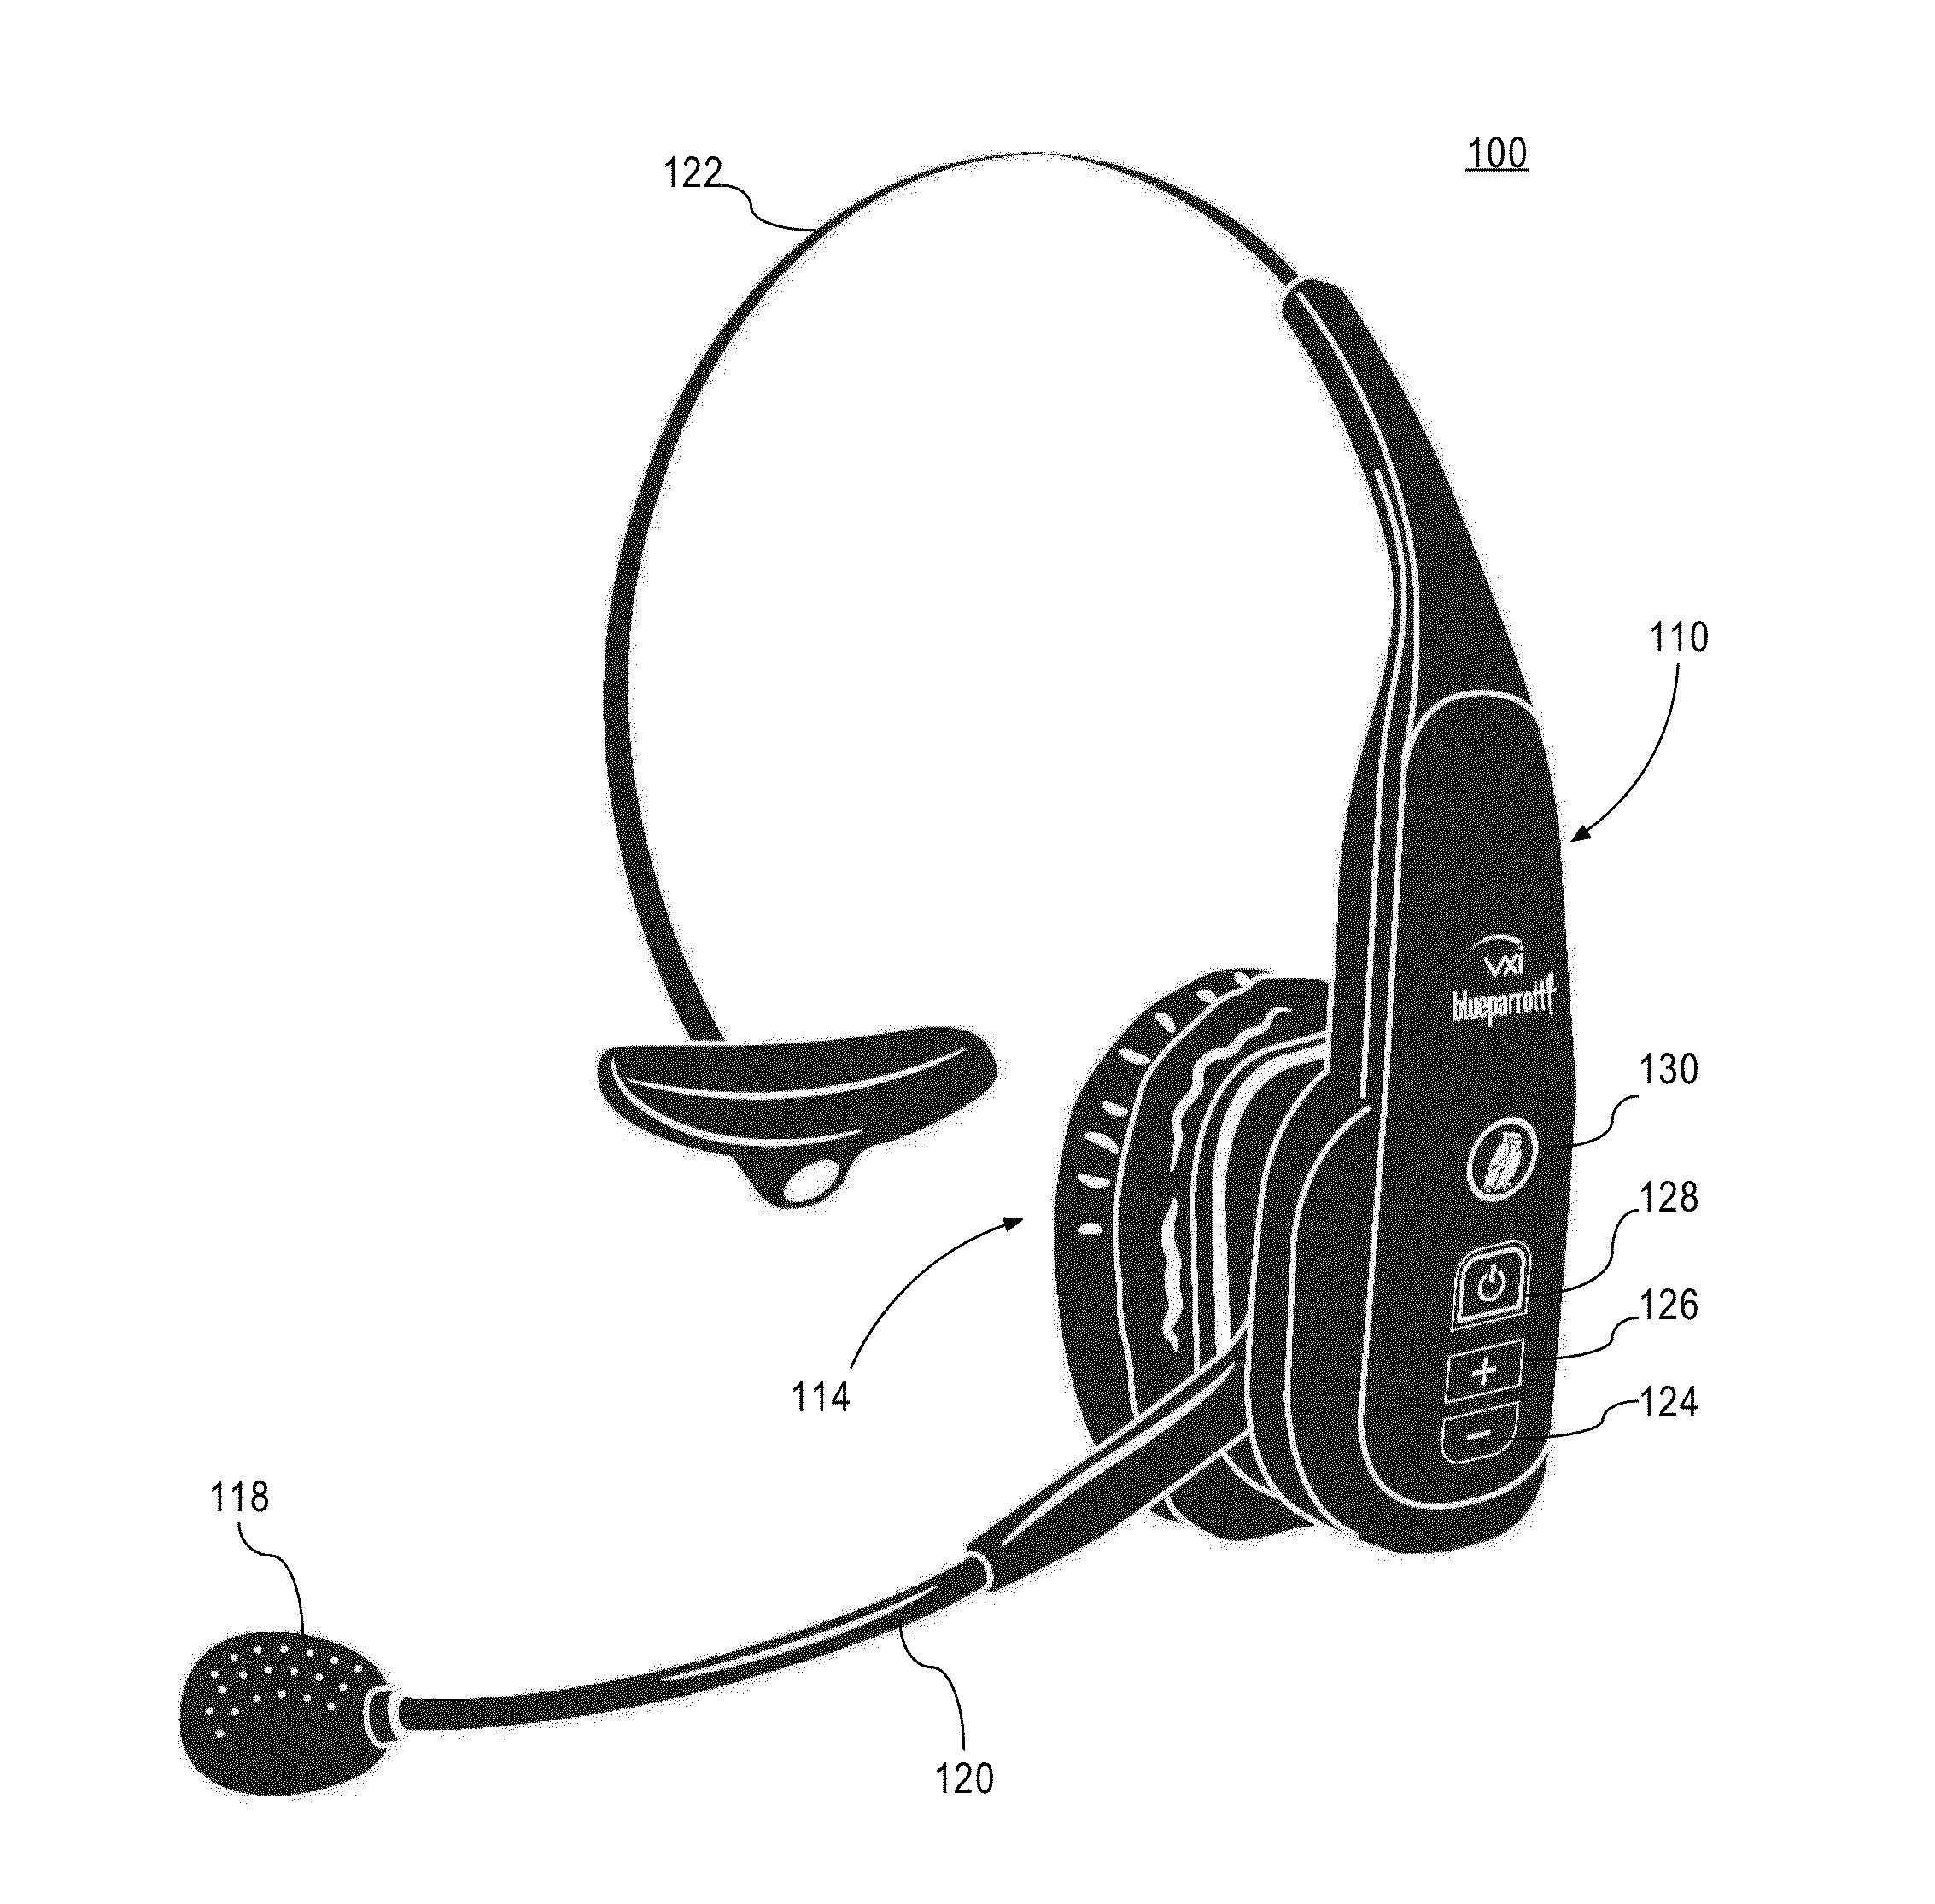 Headset system with user-configurable function button